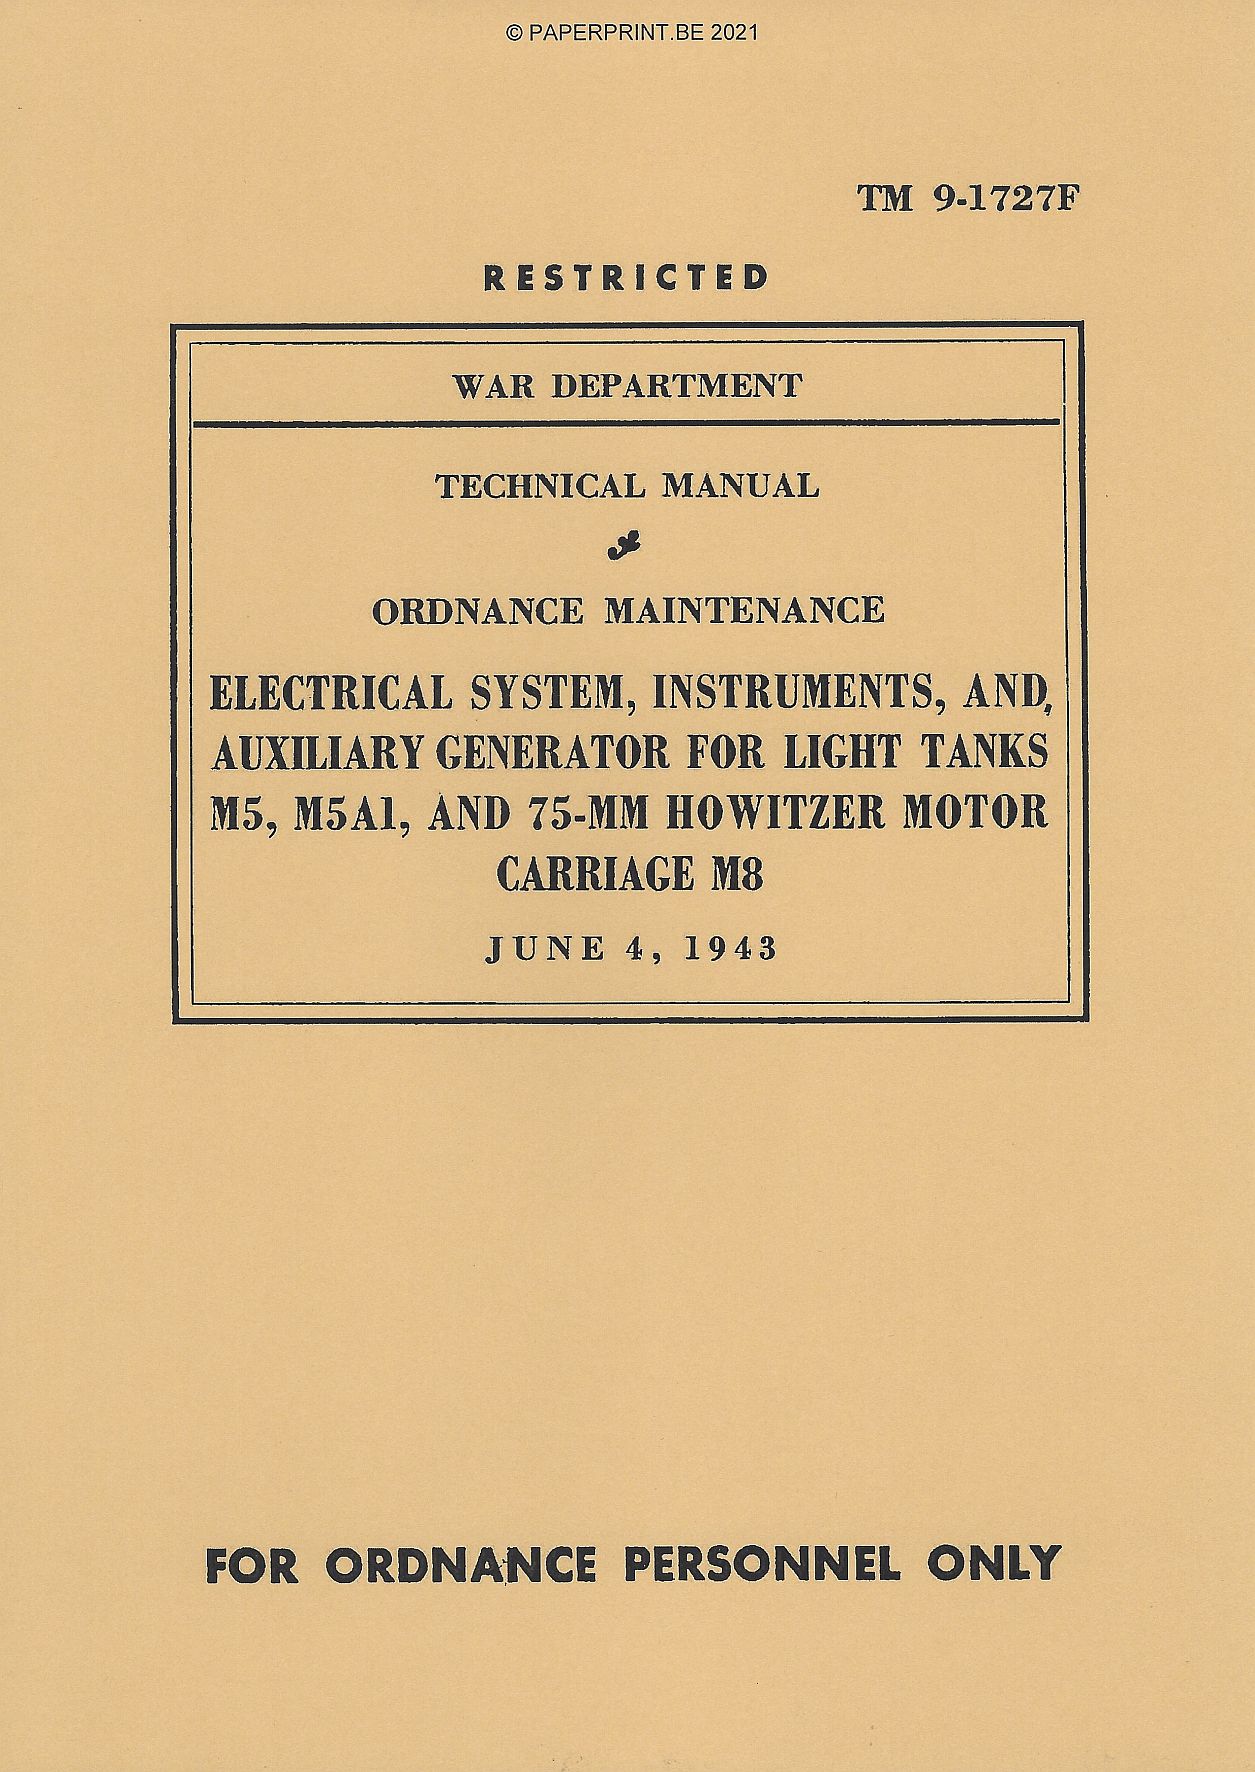 TM 9-1727F US  ELECTRICAL SYSTEM, INSTRUMENTS, AND, AUXILIARY GENERATOR FOR LIGHT TANKS M5, M5A1, AND 75-MM HOWITZER MOTOR CARRI